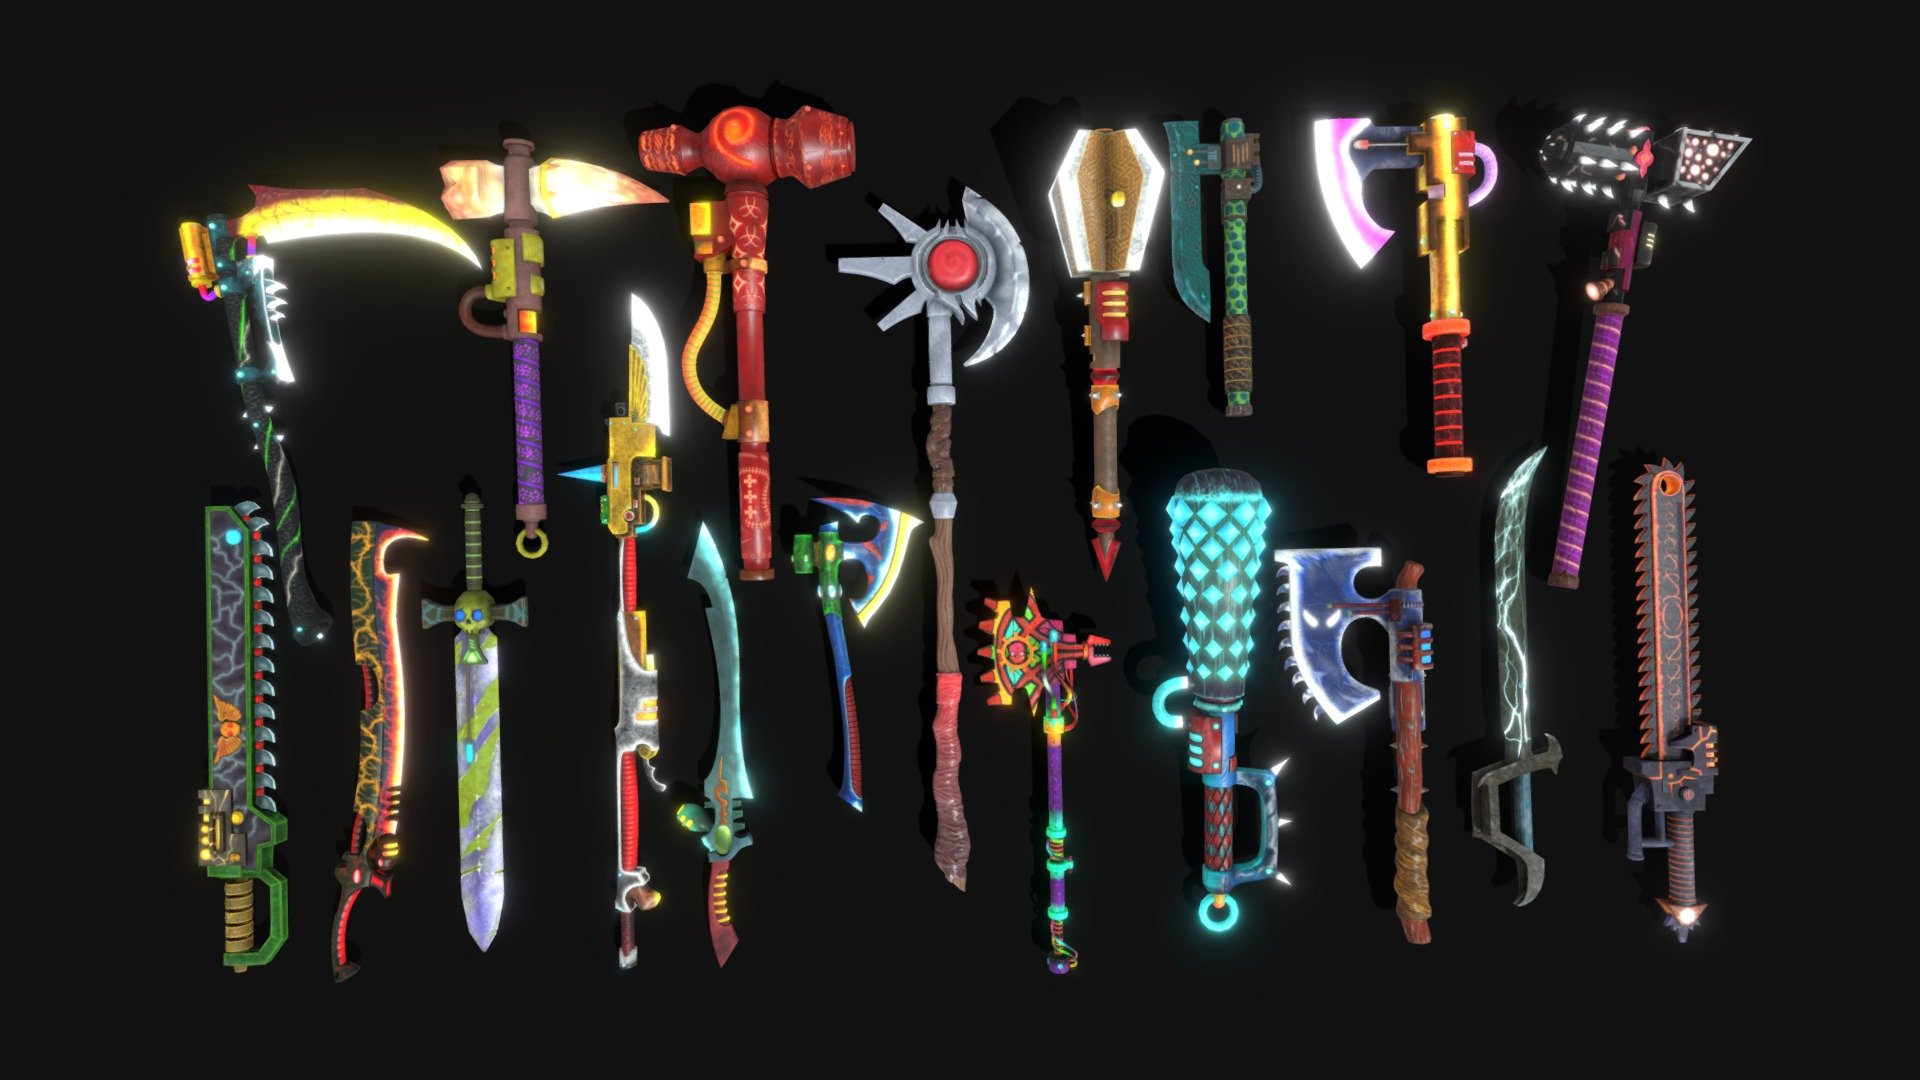 The final quality of these weapons is somewhat higher than what is listed here. Because the quality of the textures here is greatly reduced
This package contains 19 fantasy weapons. You can get different versions of this package from different places.
These weapons are lowpoly and are fully optimized for game engines.
Artstation:
Unity store:
UnrealEngine store:
Cgtrader(For single purchase, weapons): - 19 Fantasy Stylized Weapons - 3D model by Aren cg (@aren.cg) 3d model